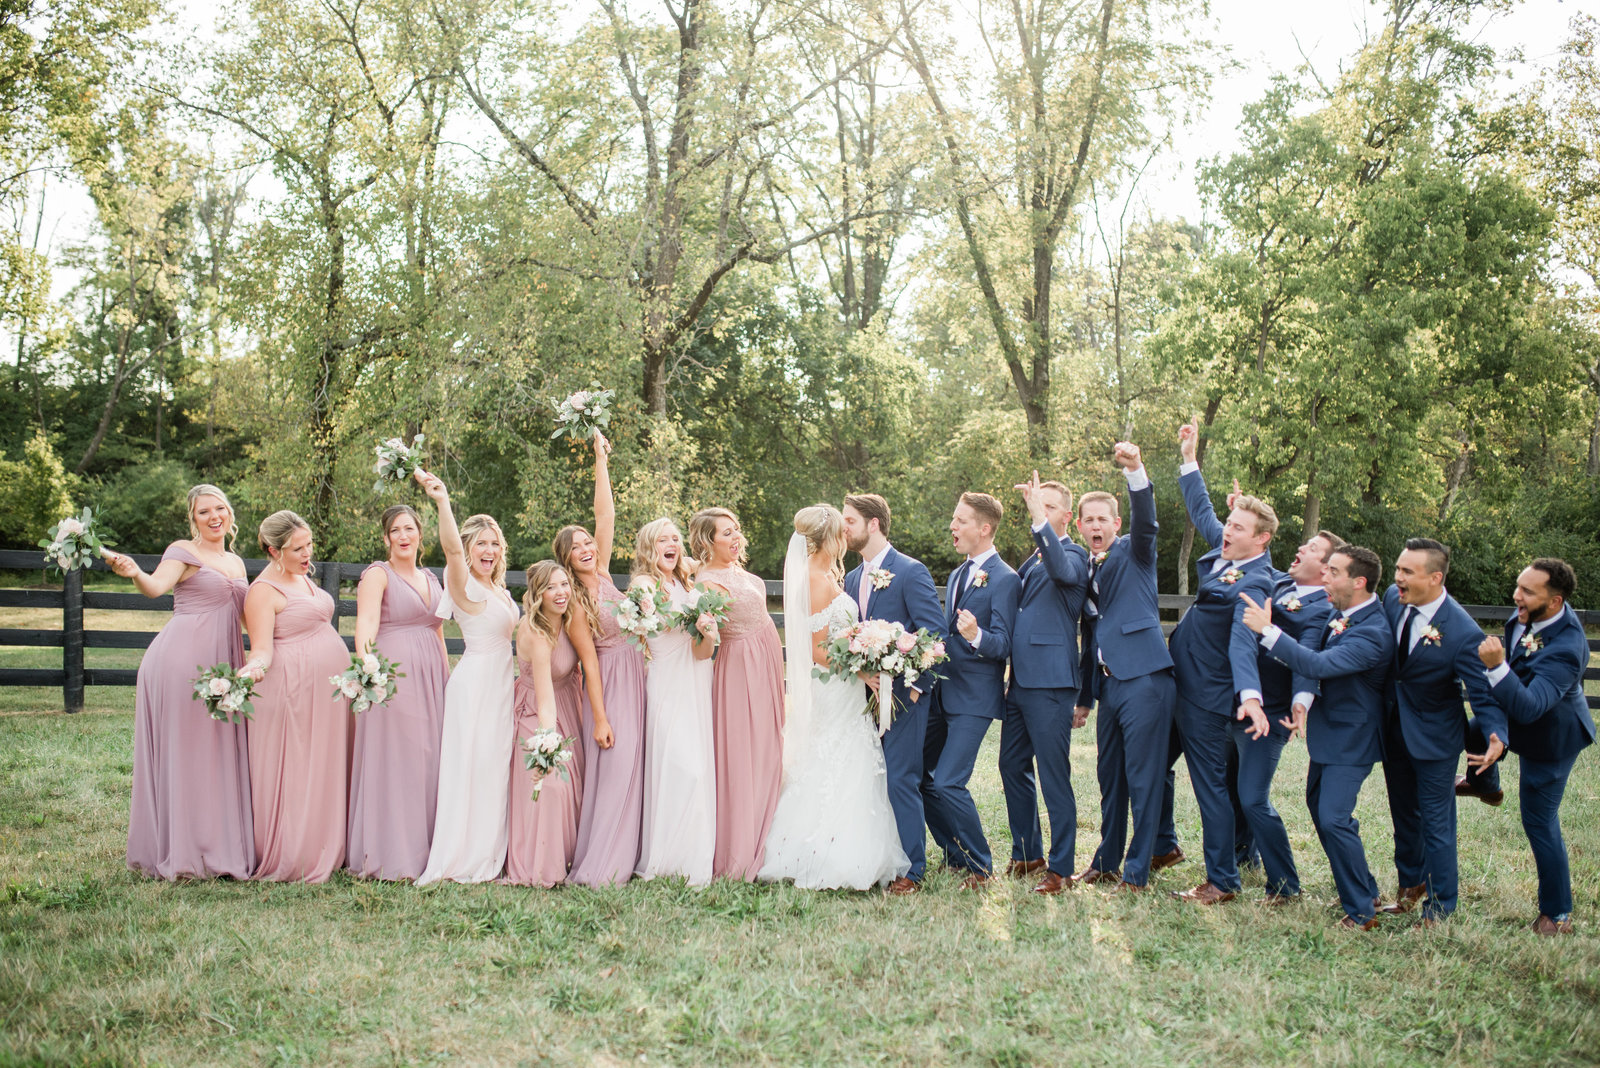 Holler_Bridal Party_064